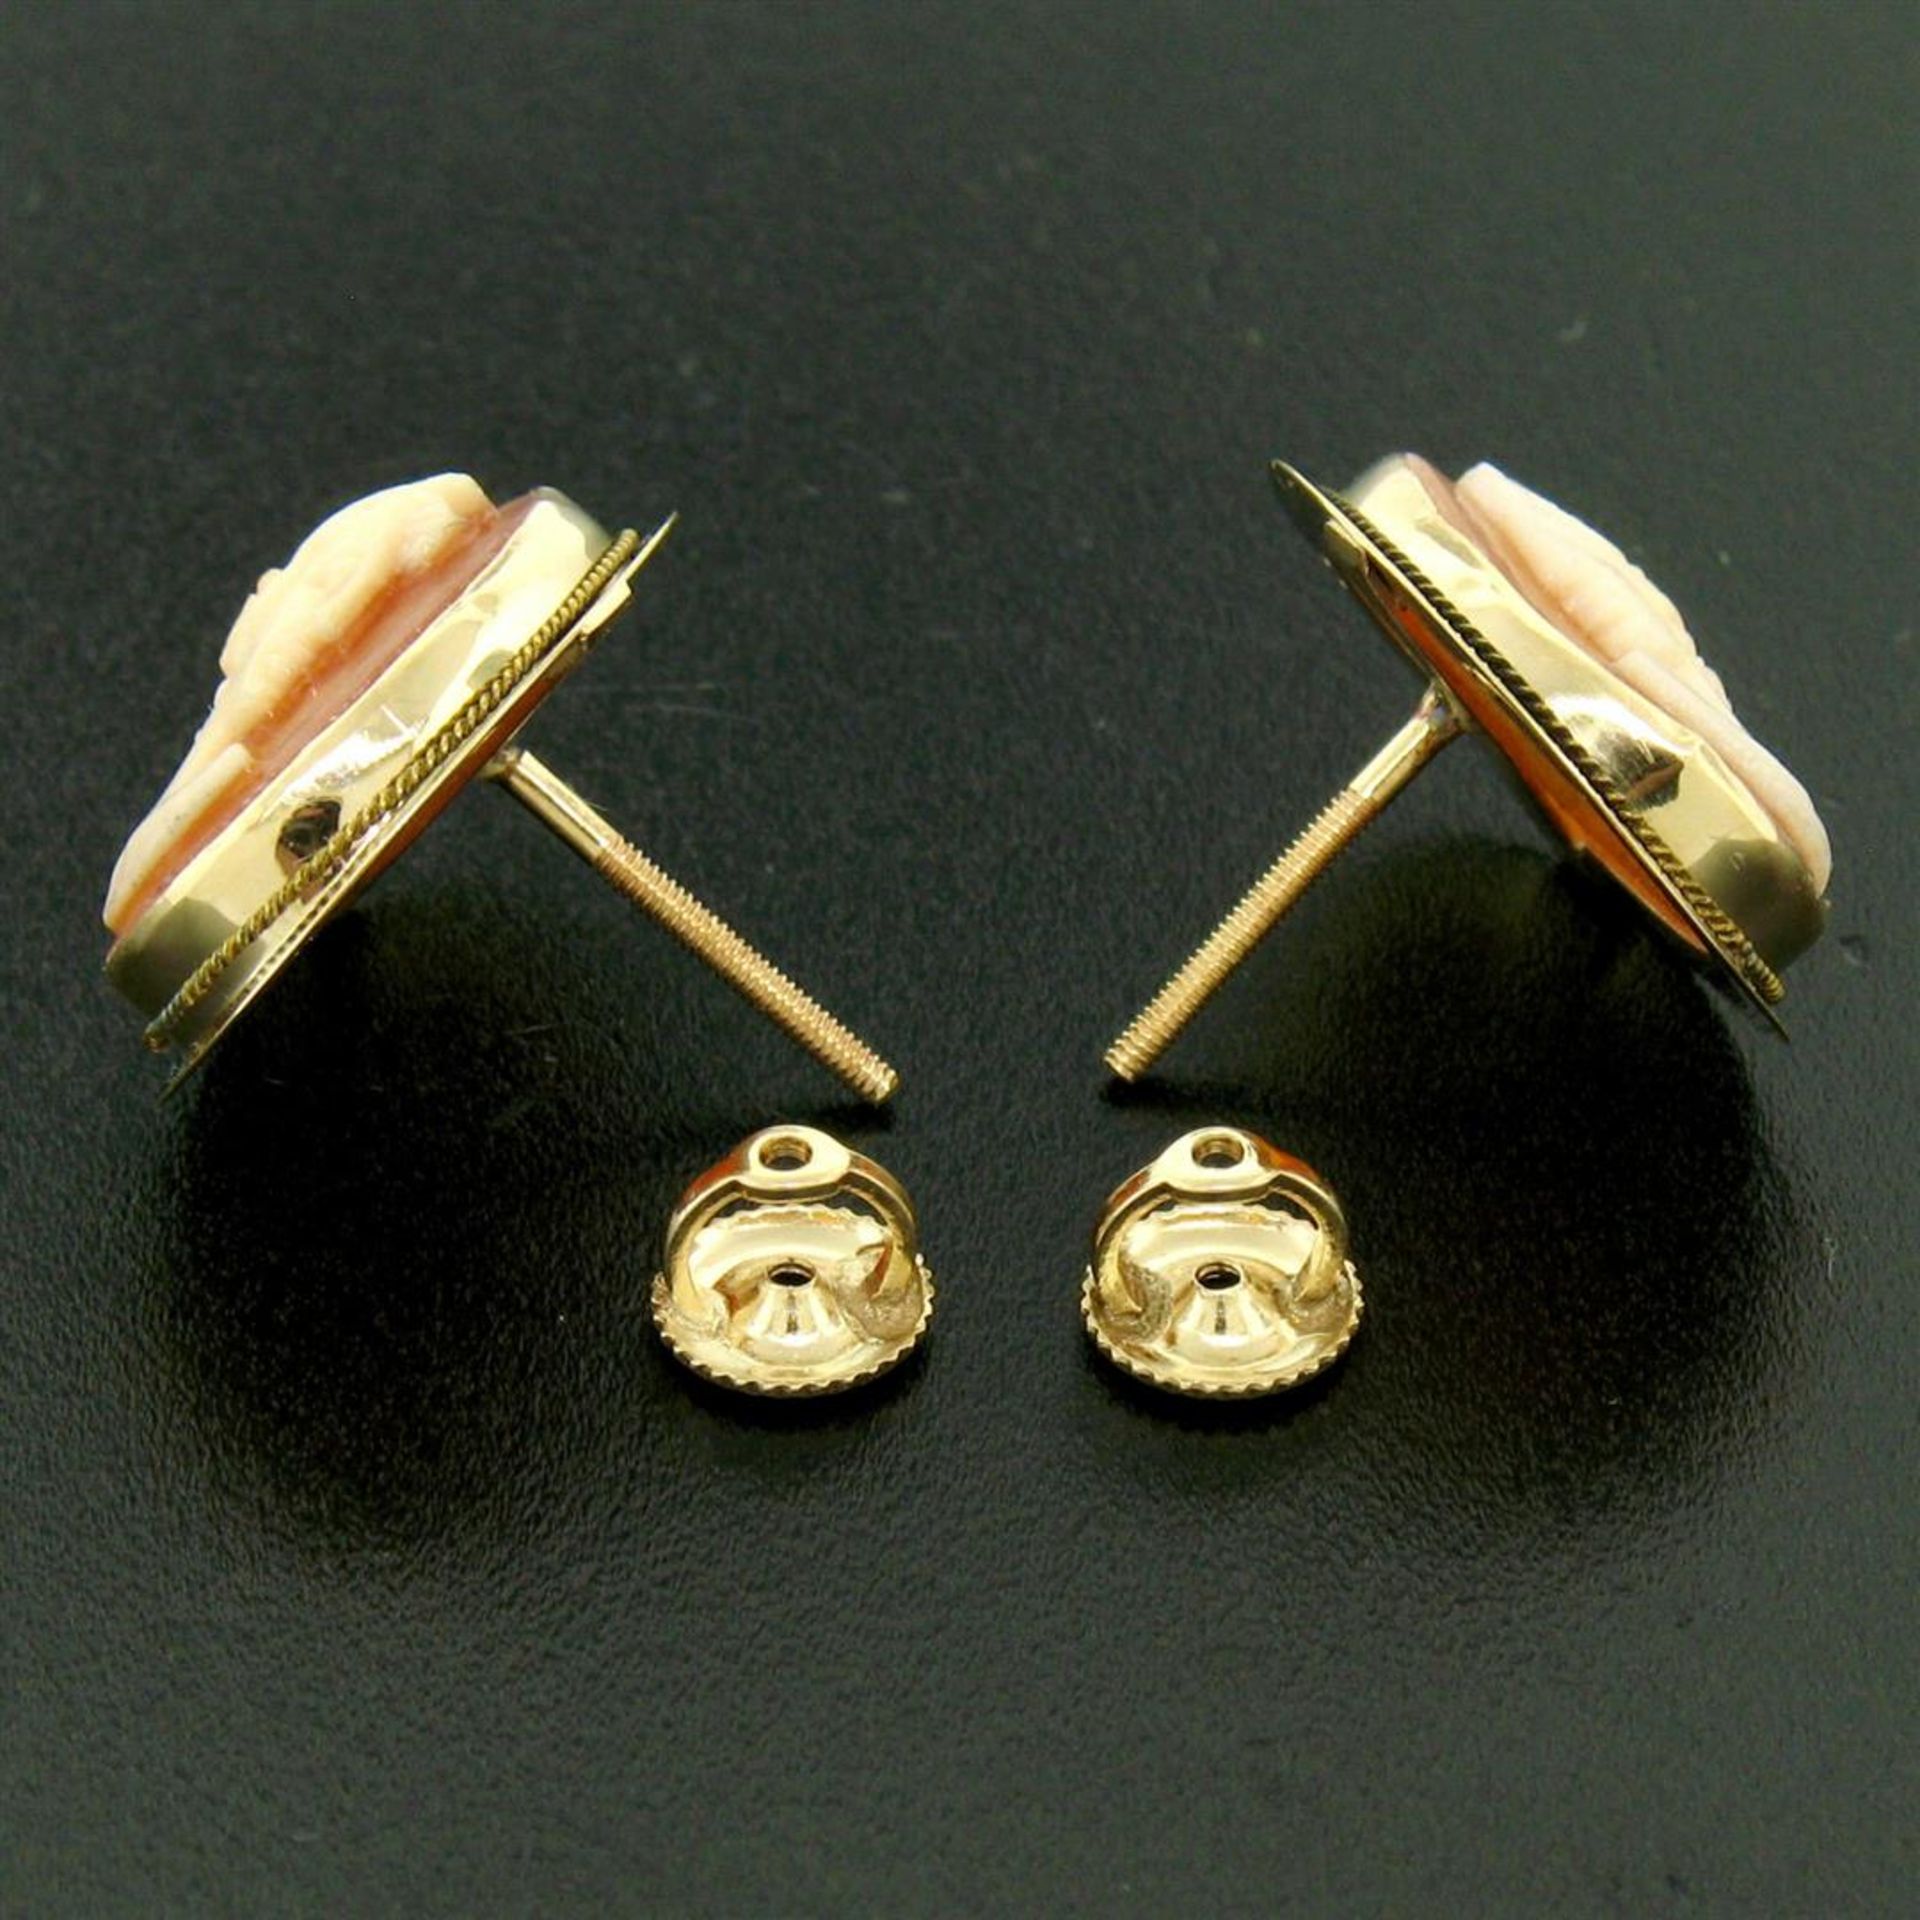 Vintage 14K Yellow Gold Oval Carved Shell Cameo Framed Screw Back Stud Earrings - Image 5 of 9